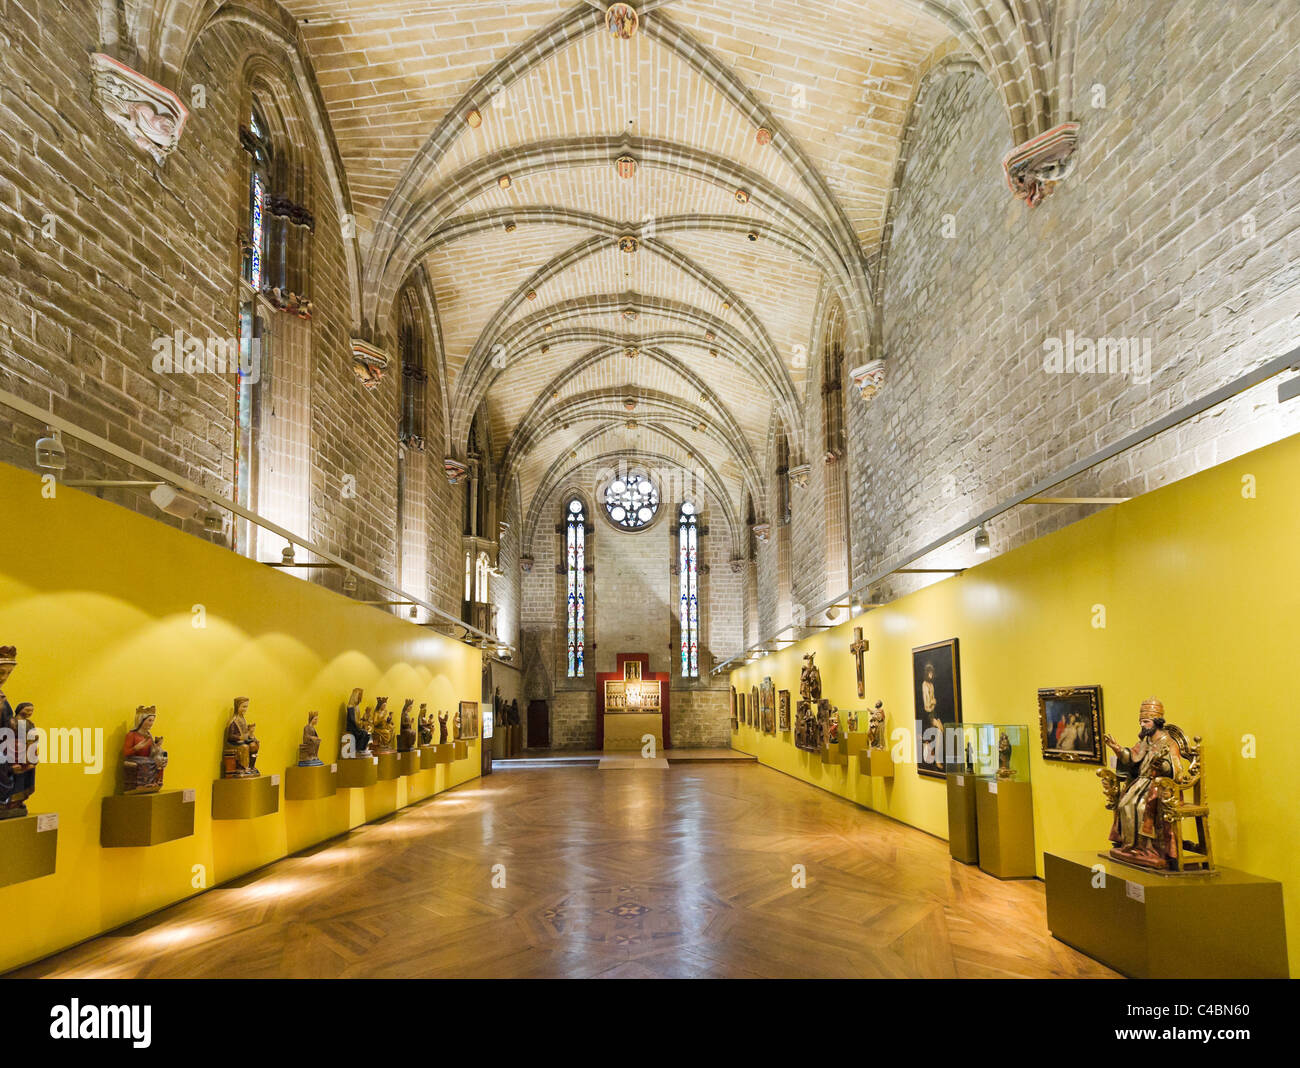 The Museo Diocesano in the Catedral de Santa Maria in the historic Old Town (Casco Viejo), Pamplona, Navarre, Spain Stock Photo